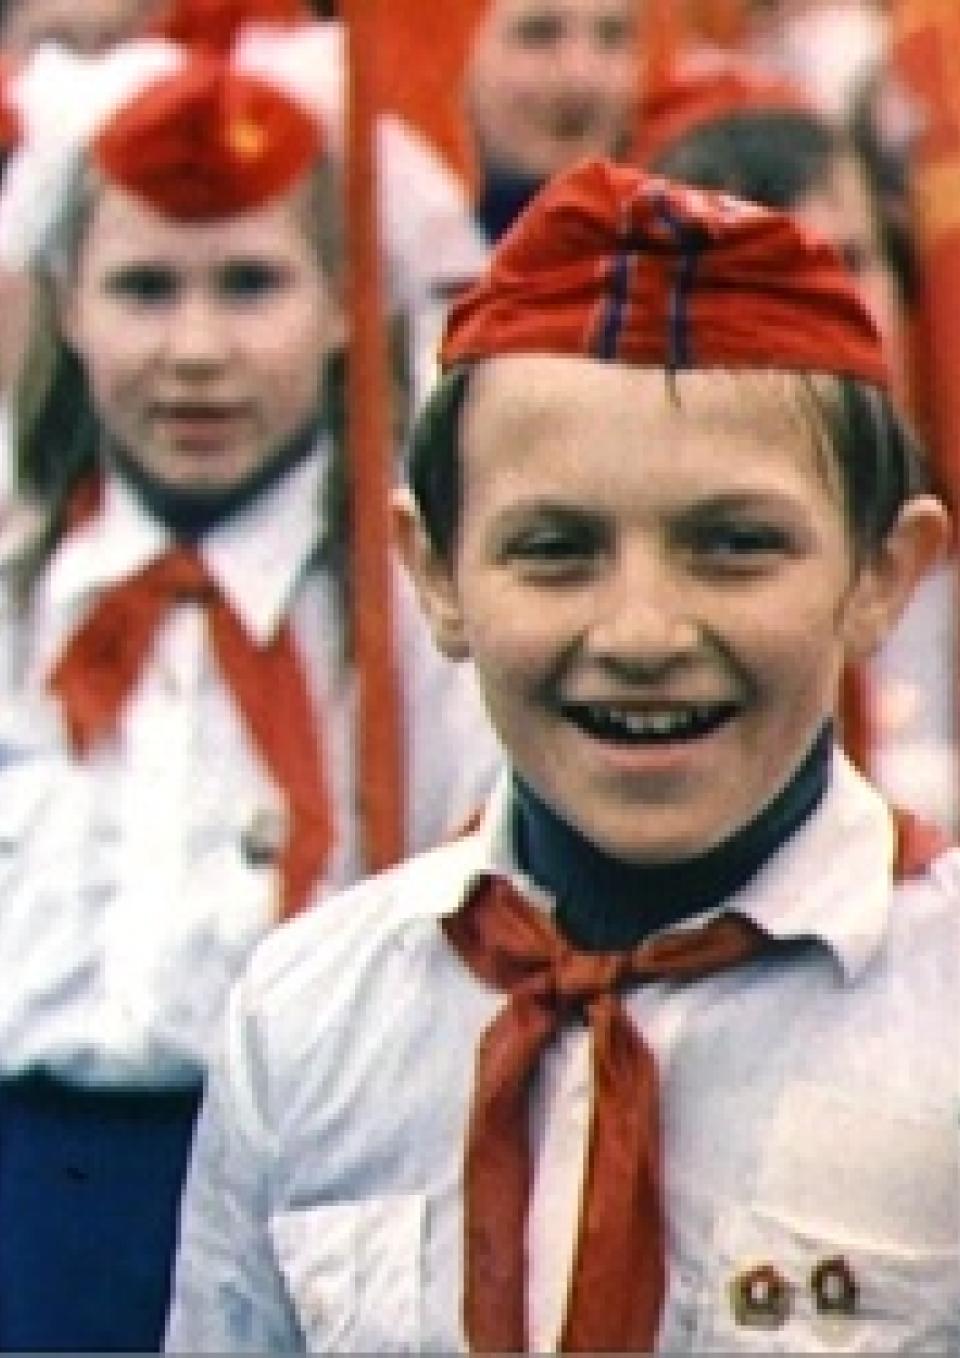 Russian Children stand on guard wearing military outfits which include red hats and scarves, and white shirts with pins on their pockets.